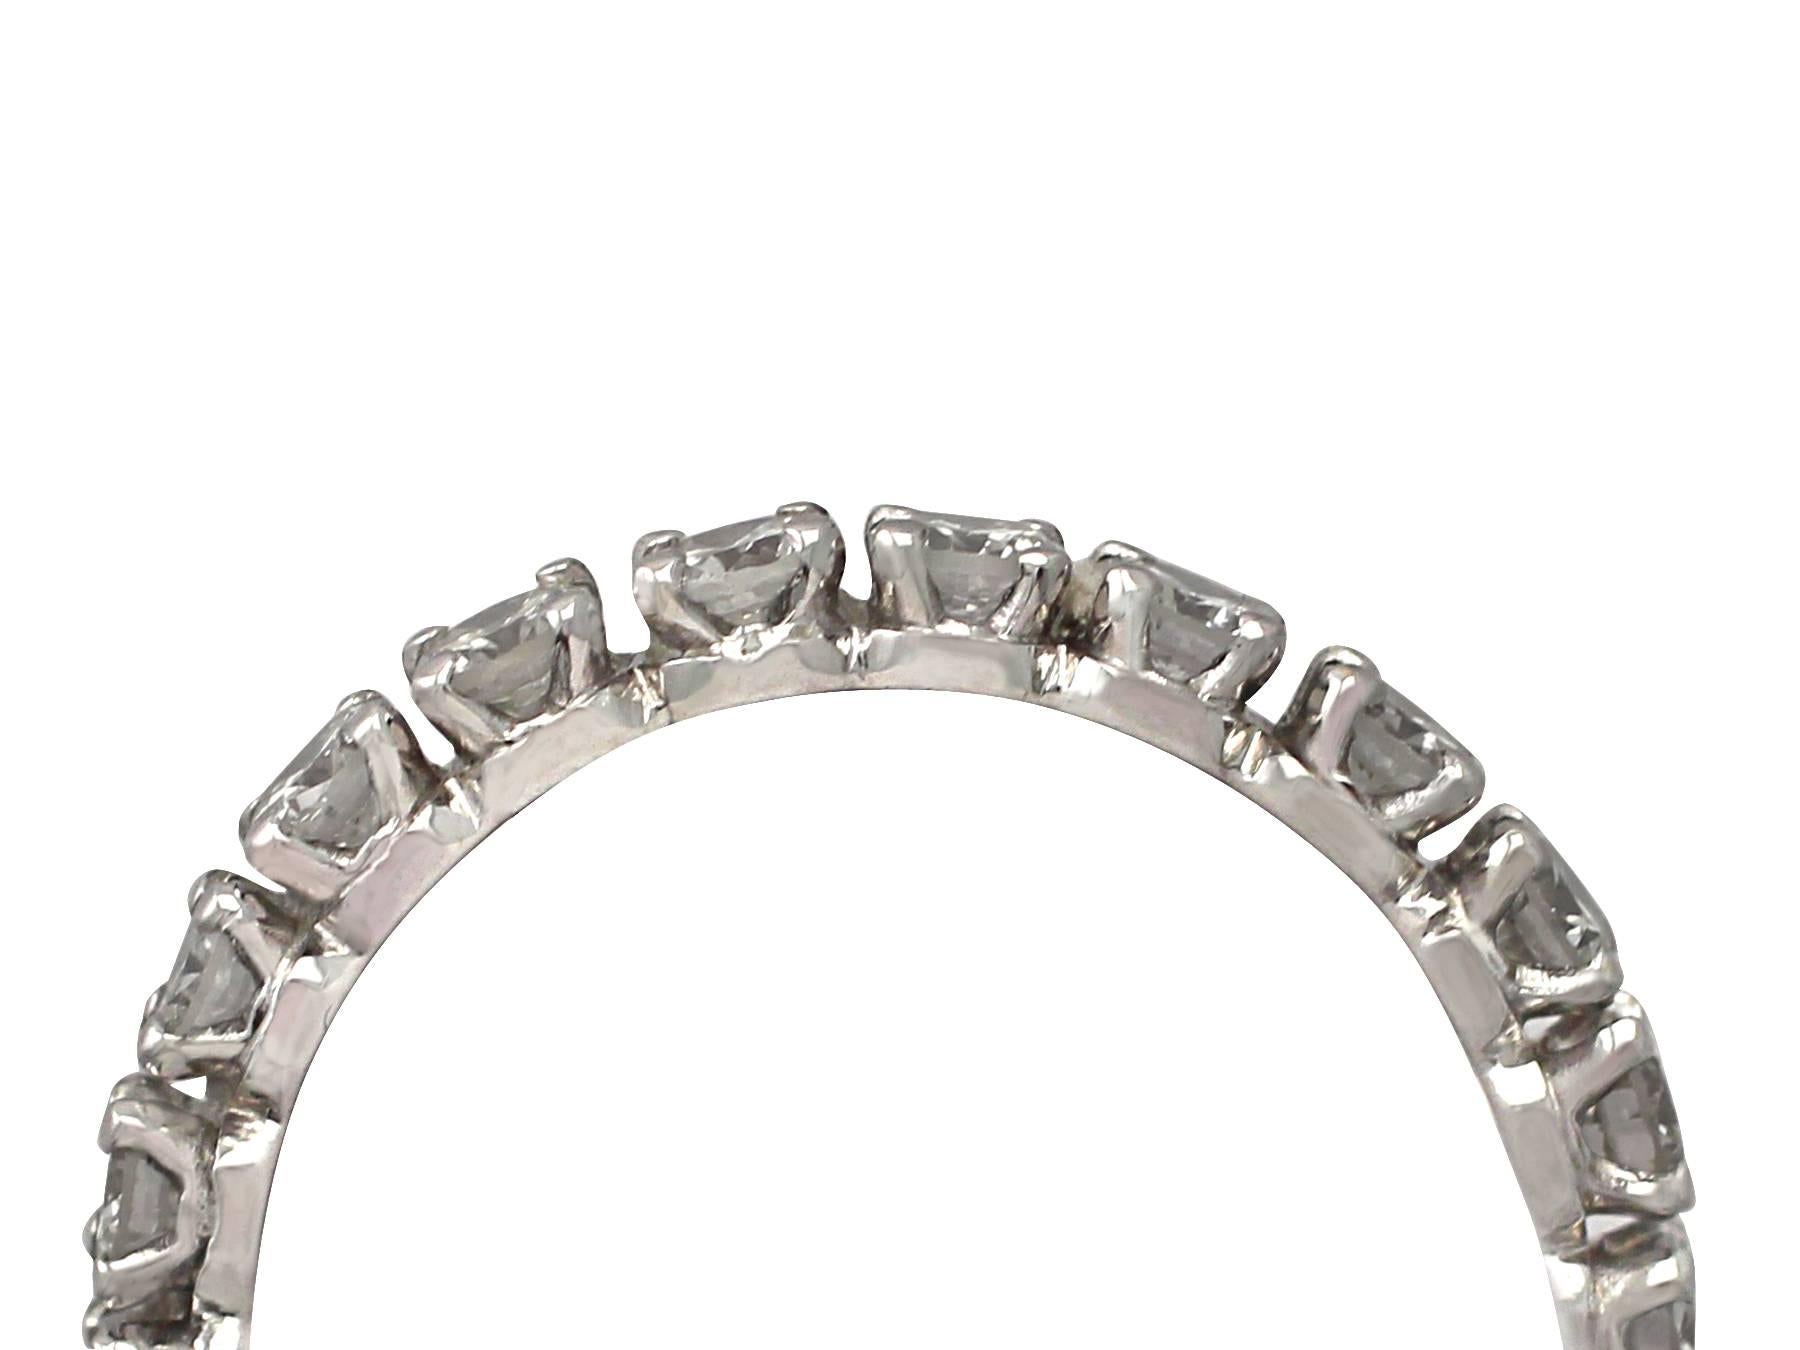 A fine and impressive 1.42 carat diamond and 18 karat white gold full eternity ring; part of our vintage jewellery collections

This fine and impressive vintage diamond full eternity ring has been crafted in 18k white gold.

This vintage eternity